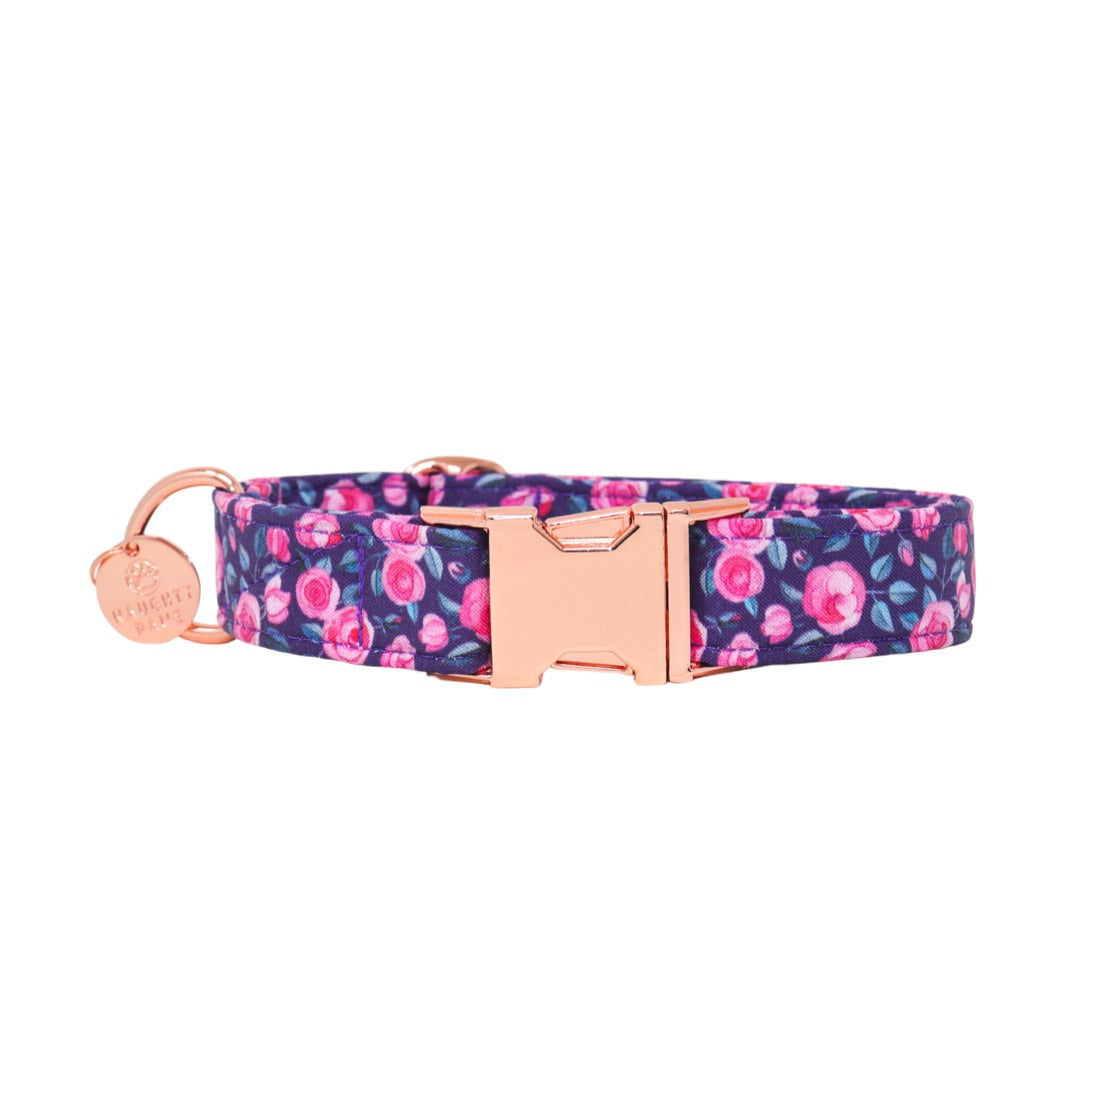 peonies dog collar for valentines day 